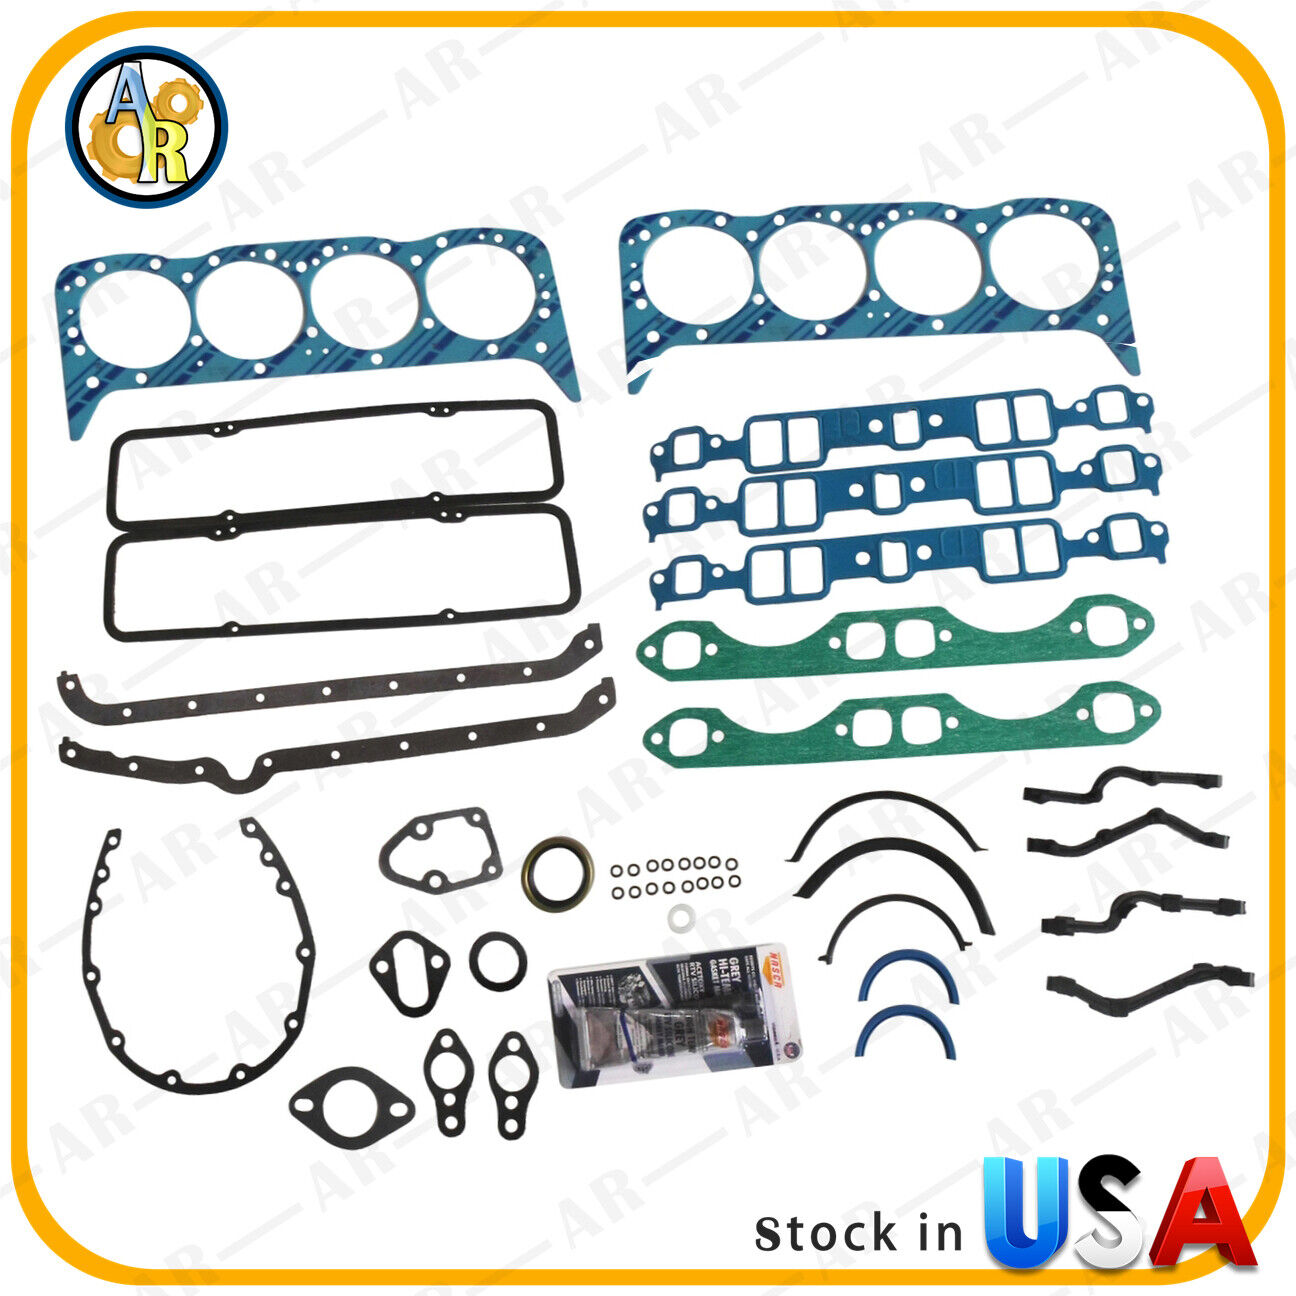 Full Engine Gasket Set For Small Block Chevy 283 302 307 327 350 Buick Century